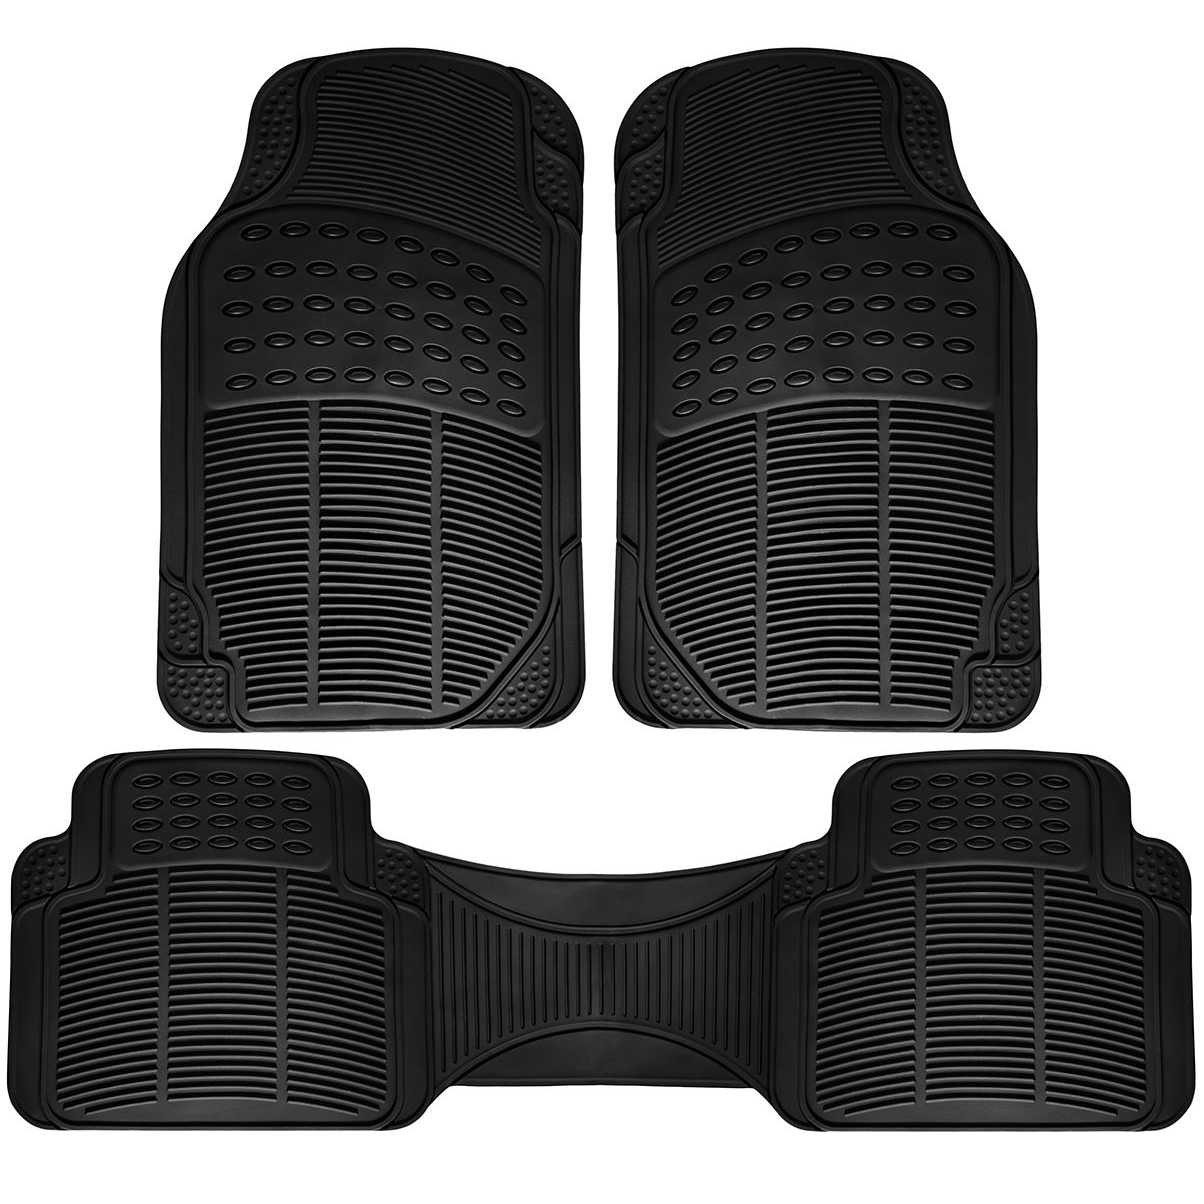 Set All Weather Rubber Floor Mats for SUVs Trucks & Vans Only $15.20 Shipped!